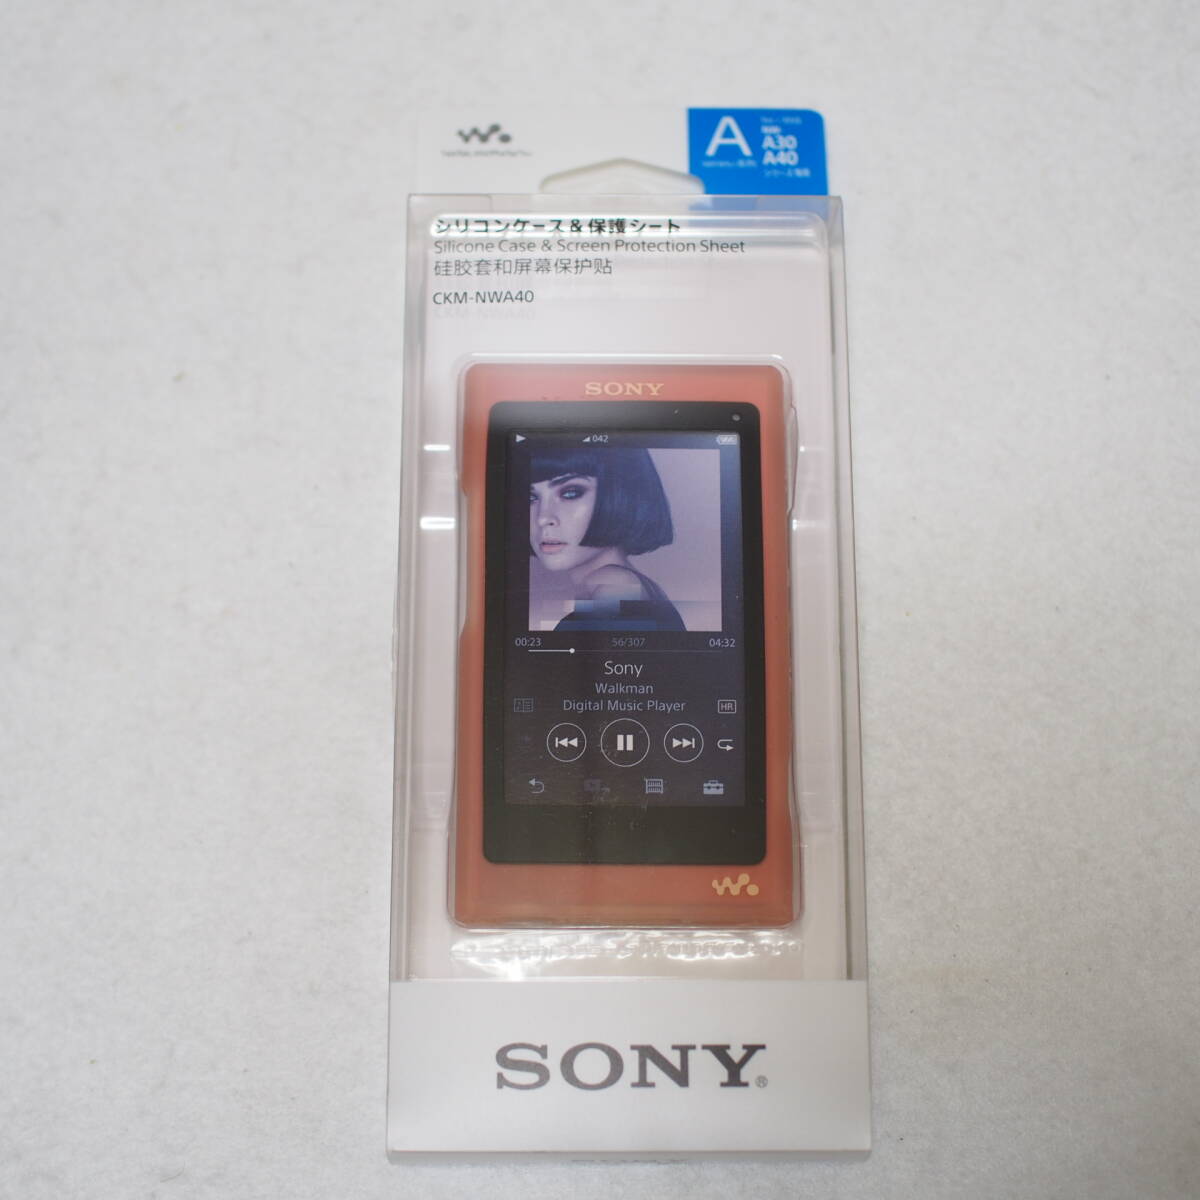 SONY 純正 ソニー CKM-NWA40 シリコンケース RED レッド /NW-A3040 ウォークマン　保管品 管理番号475-6-1_画像1